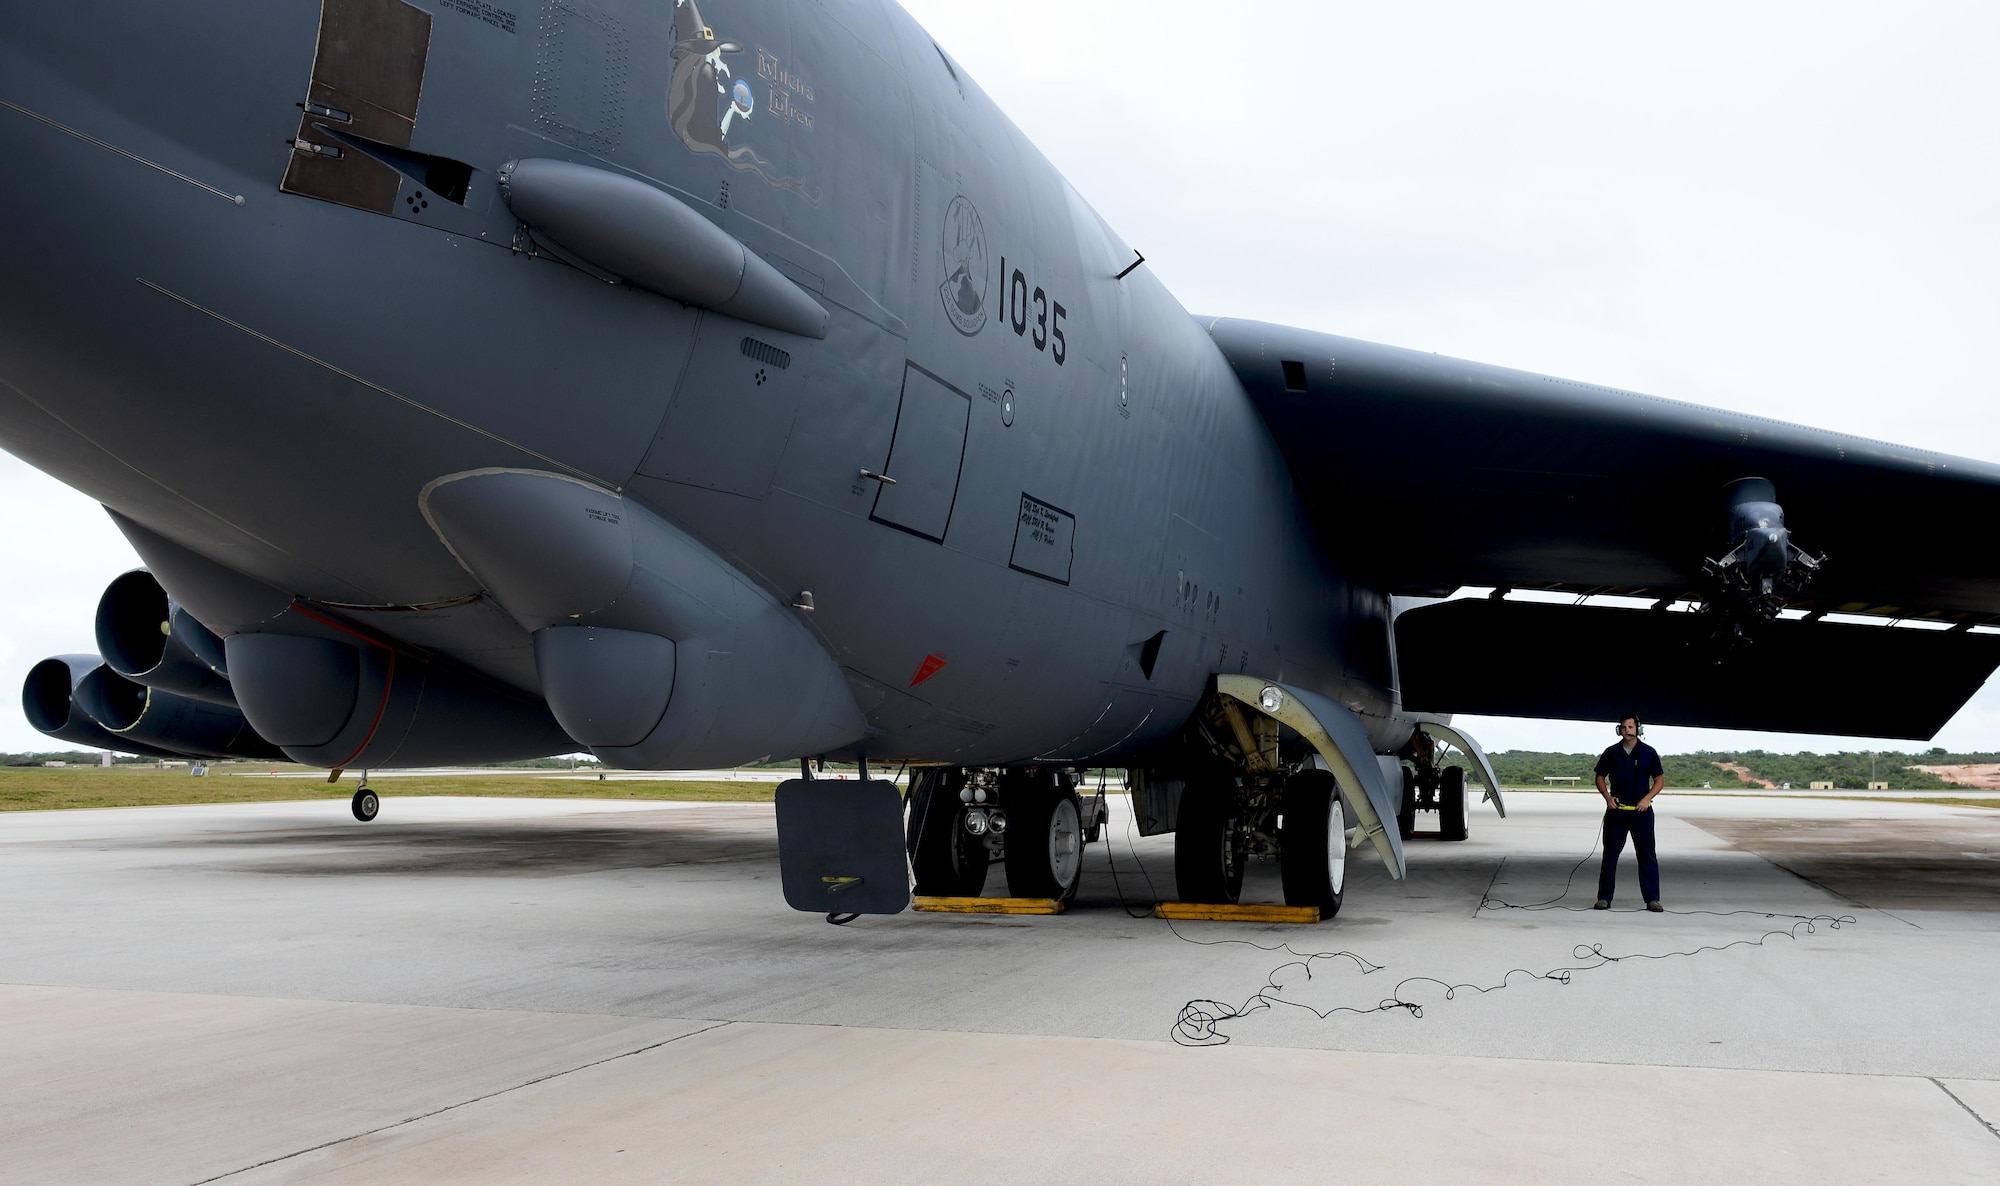 Airman 1st Class Richard Bradley, a crew chief with the 36th Expeditionary Aircraft Maintenance Squadron, waits for instructions from aircrew during pre-flight inspections April 14, 2016, at Andersen Air Force Base, Guam. The U.S. Air Force B-52 Stratofortress bomber is a long-range, heavy bomber that can fly up to 50,000 feet and has the capability to carry 70,000 pounds of nuclear or precision guided conventional ordnance with worldwide precision navigation capability. (U.S. Air Force photo by Airman 1st Class Arielle Vasquez/Released)